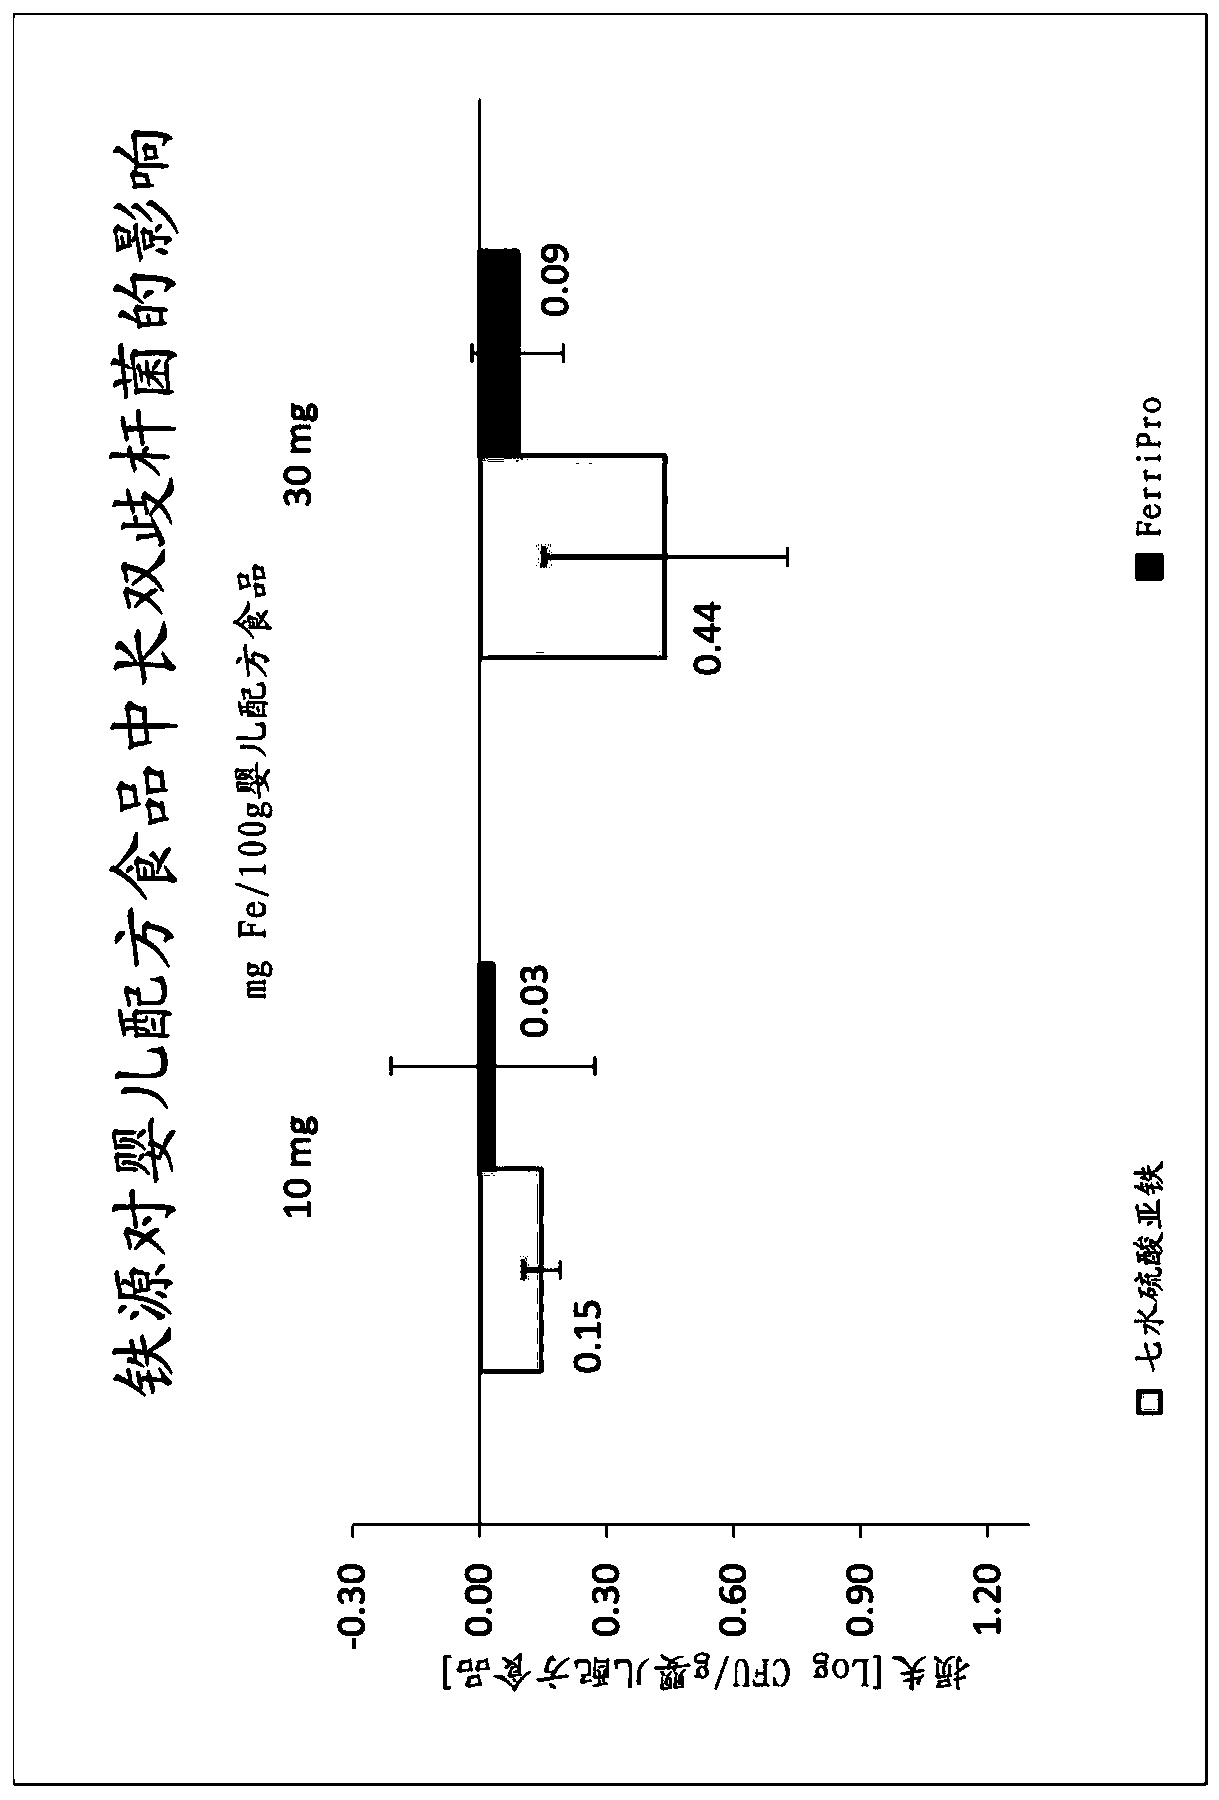 Composition in powder form comprising iron-milk protein complexes and probiotic bacteria